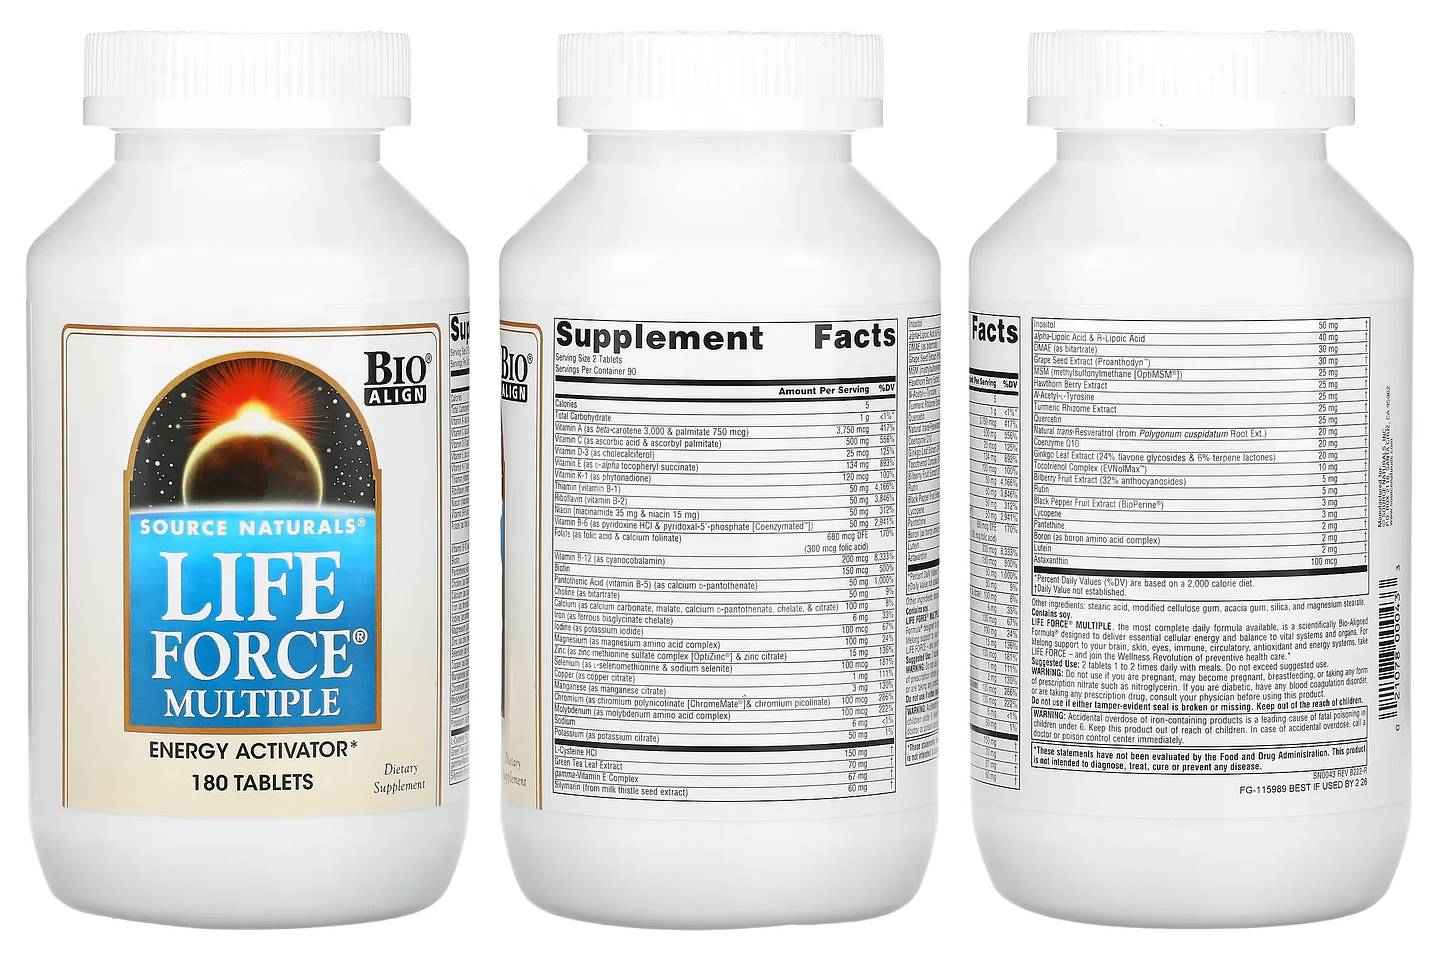 Source Naturals, Life Force Multiple packaging